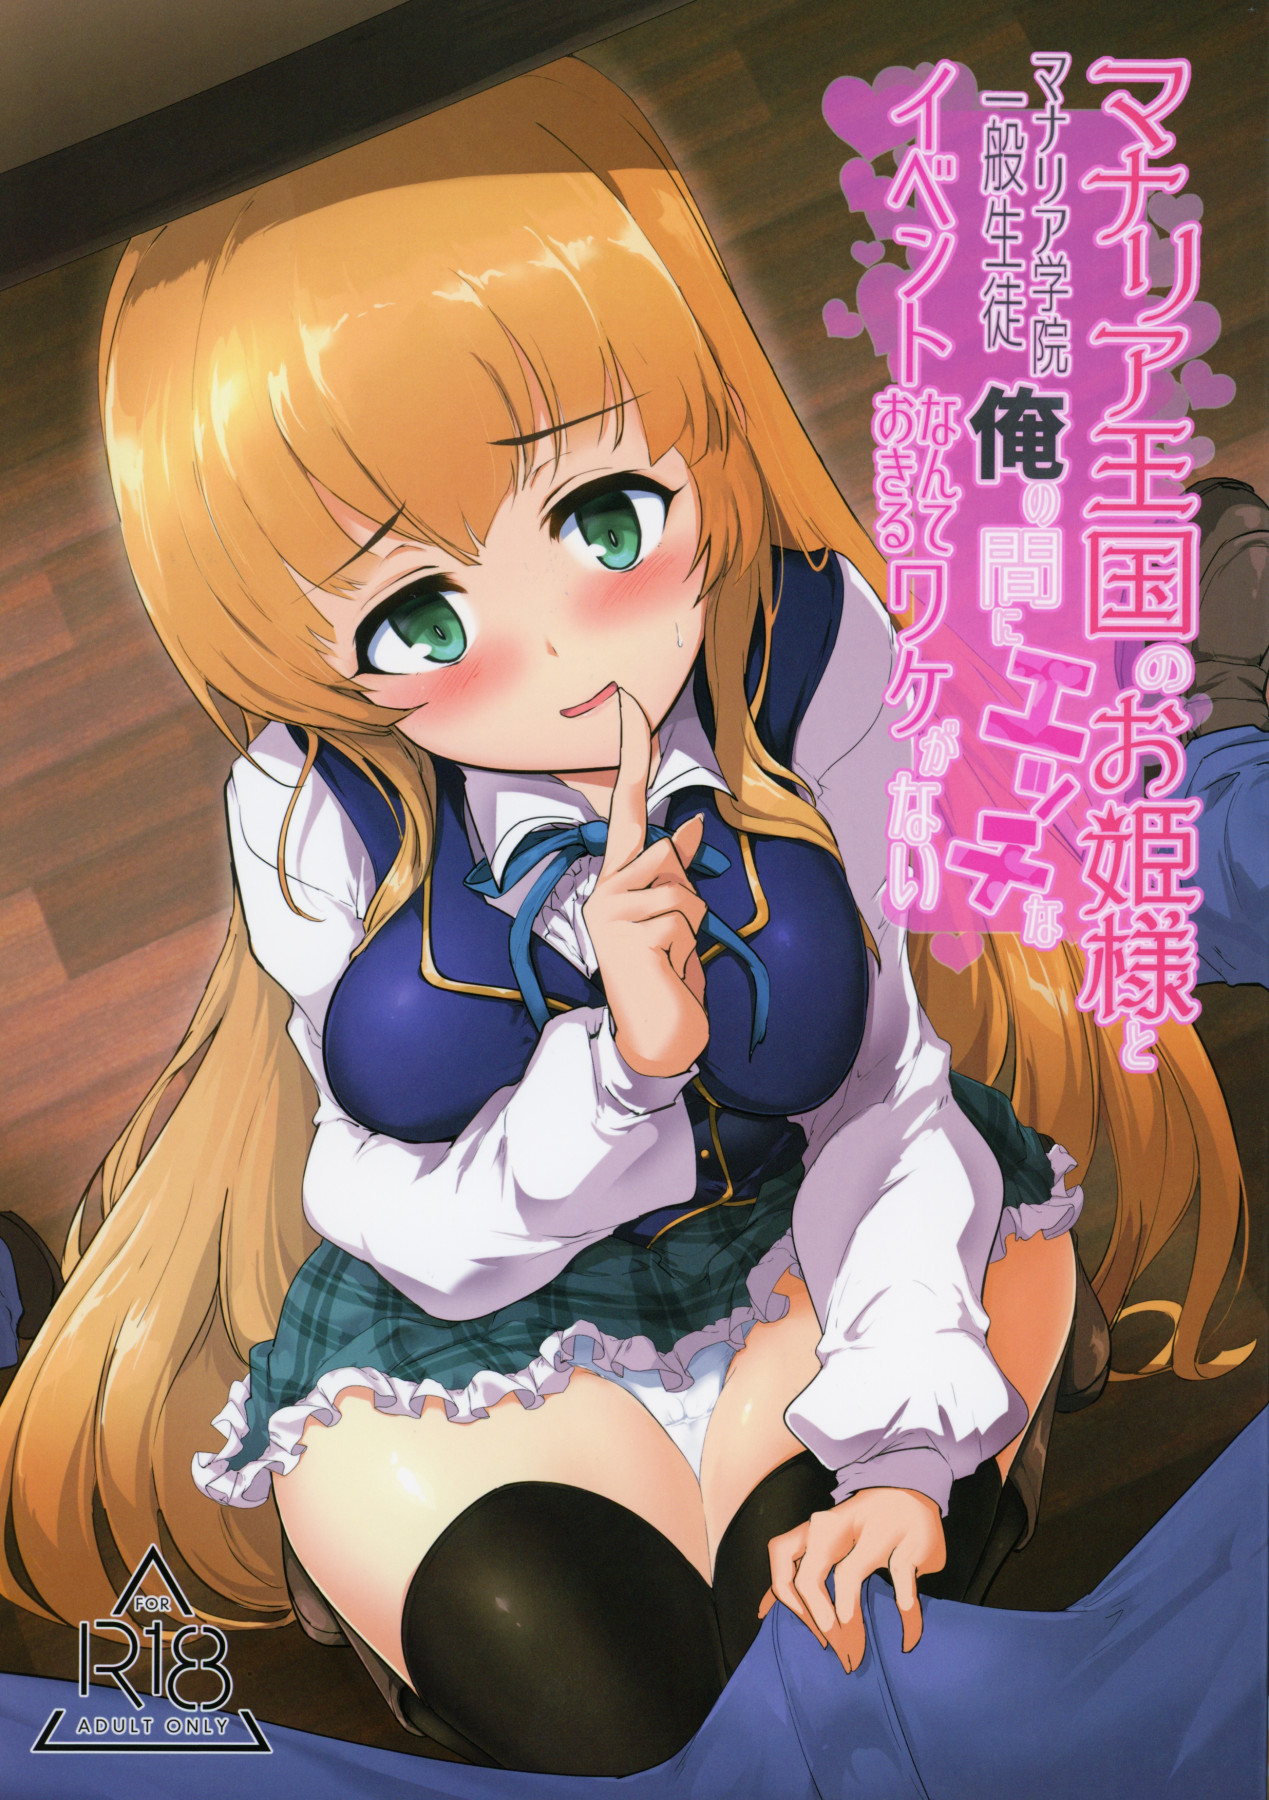 Hentai Manga Comic-Manaria There's No Way There'd Be a Lewd Event at Manaria Academy With The Kingdom's Princess-Read-1